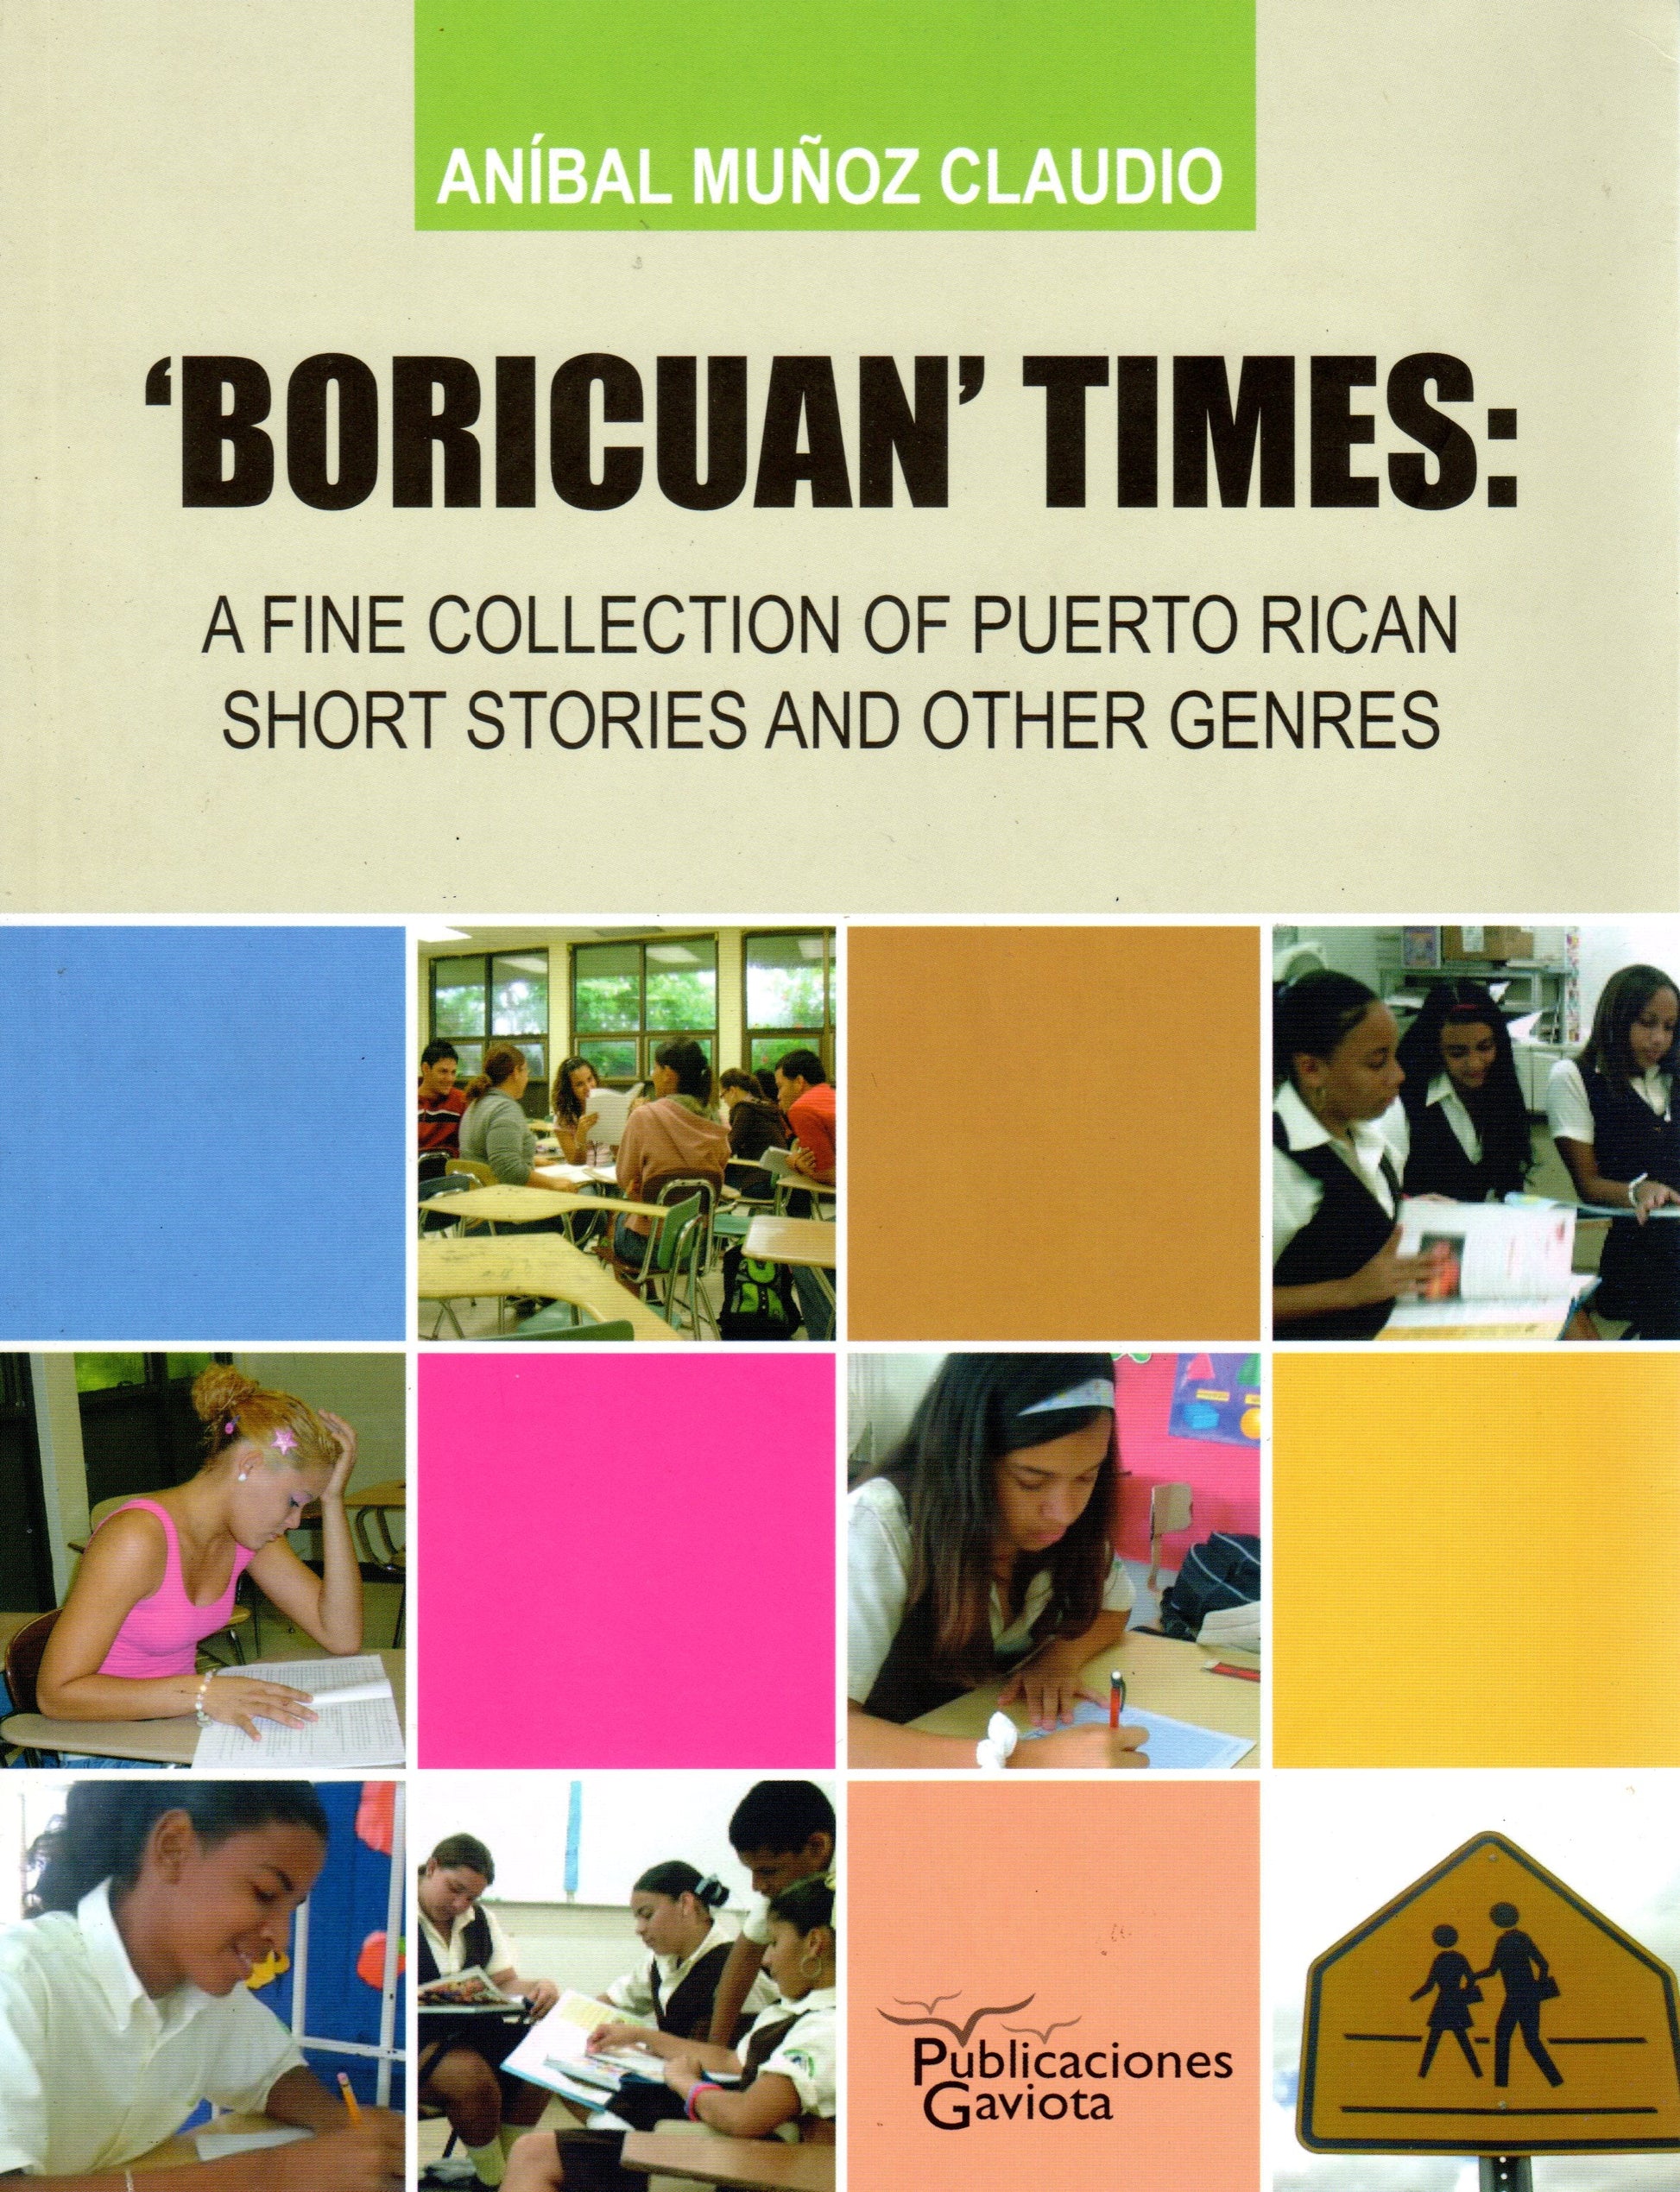 Boricuan Times: A fine collection of Puerto Rican short stories and other gendes